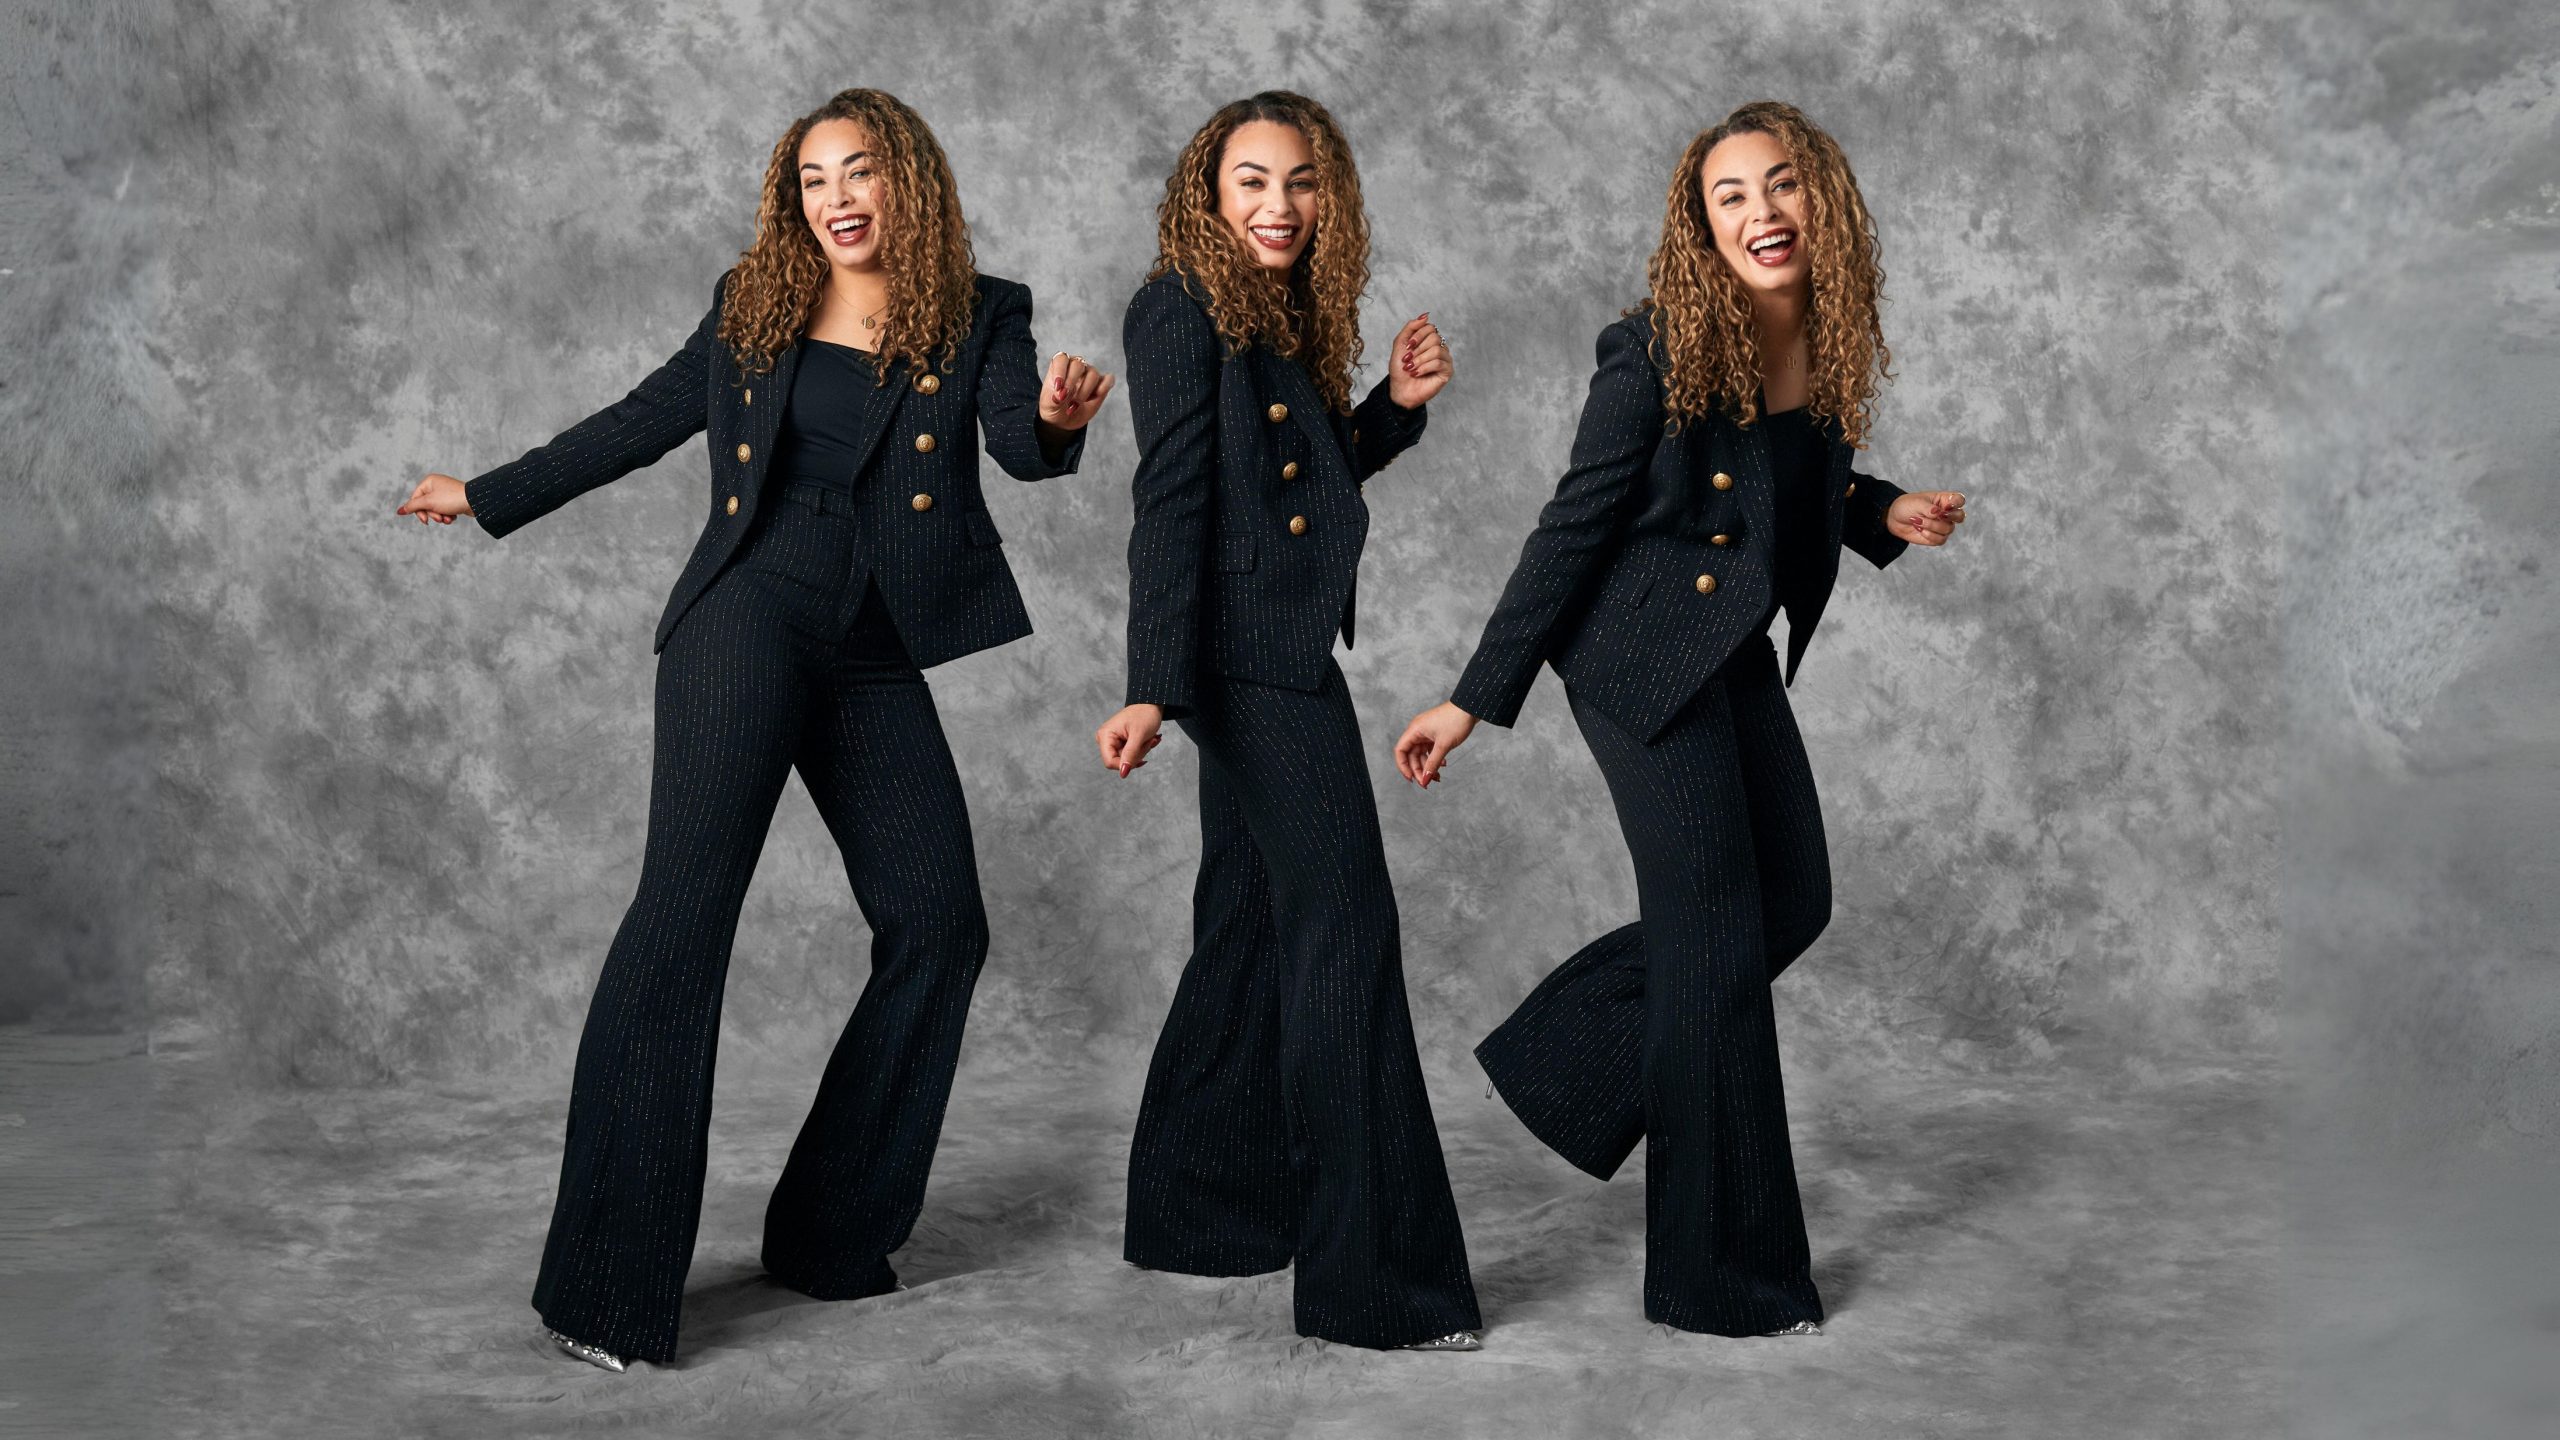 three versions of Sarah Nurse wearing a black suit dancing against a grey backdrop